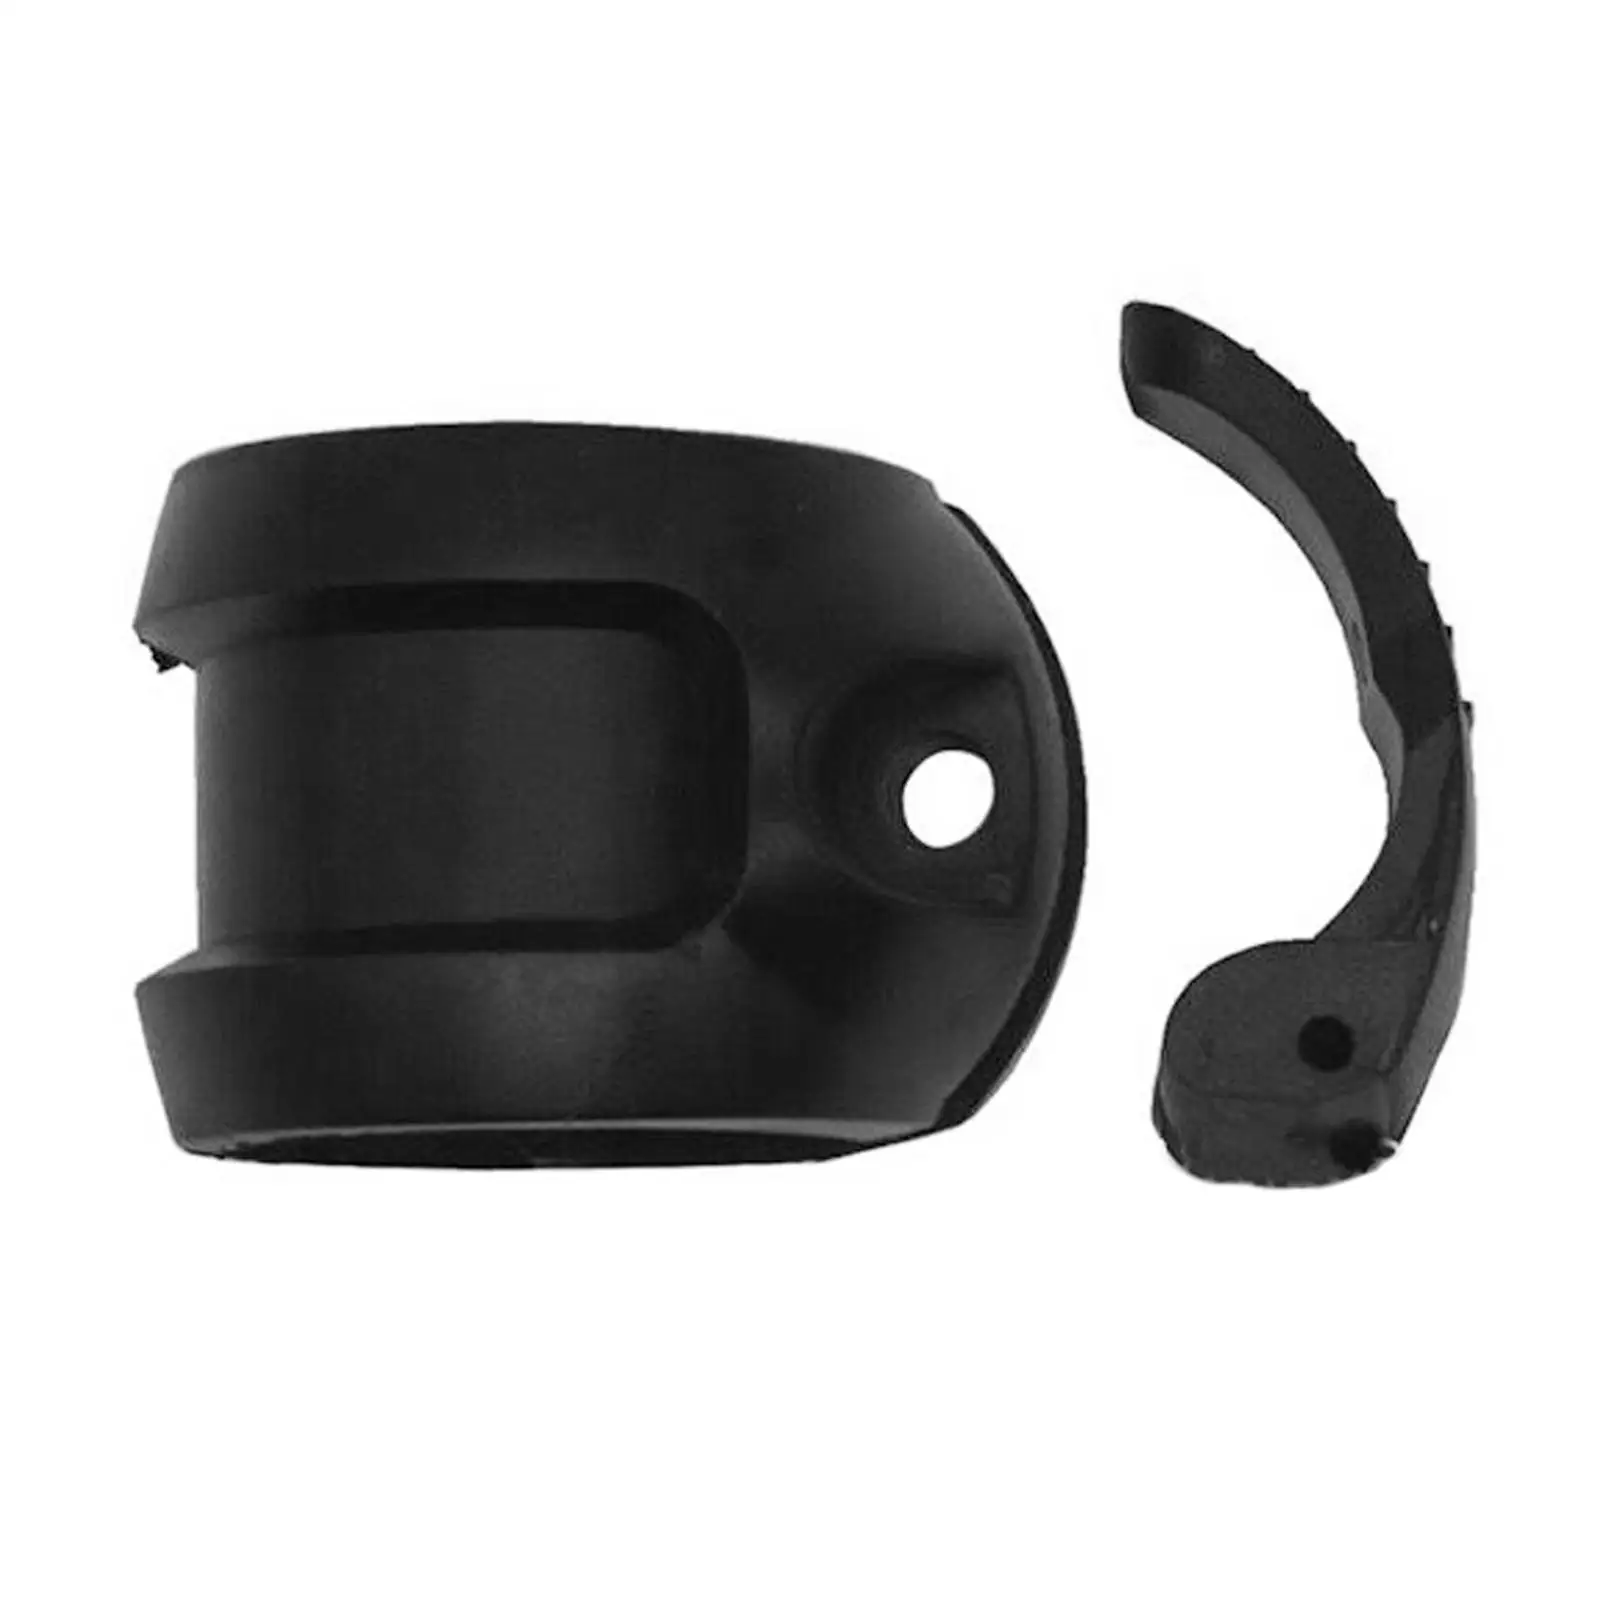 Surf Paddle Lock for Dia 26-29mm Quick Release Paddle Clamp for Outdoor